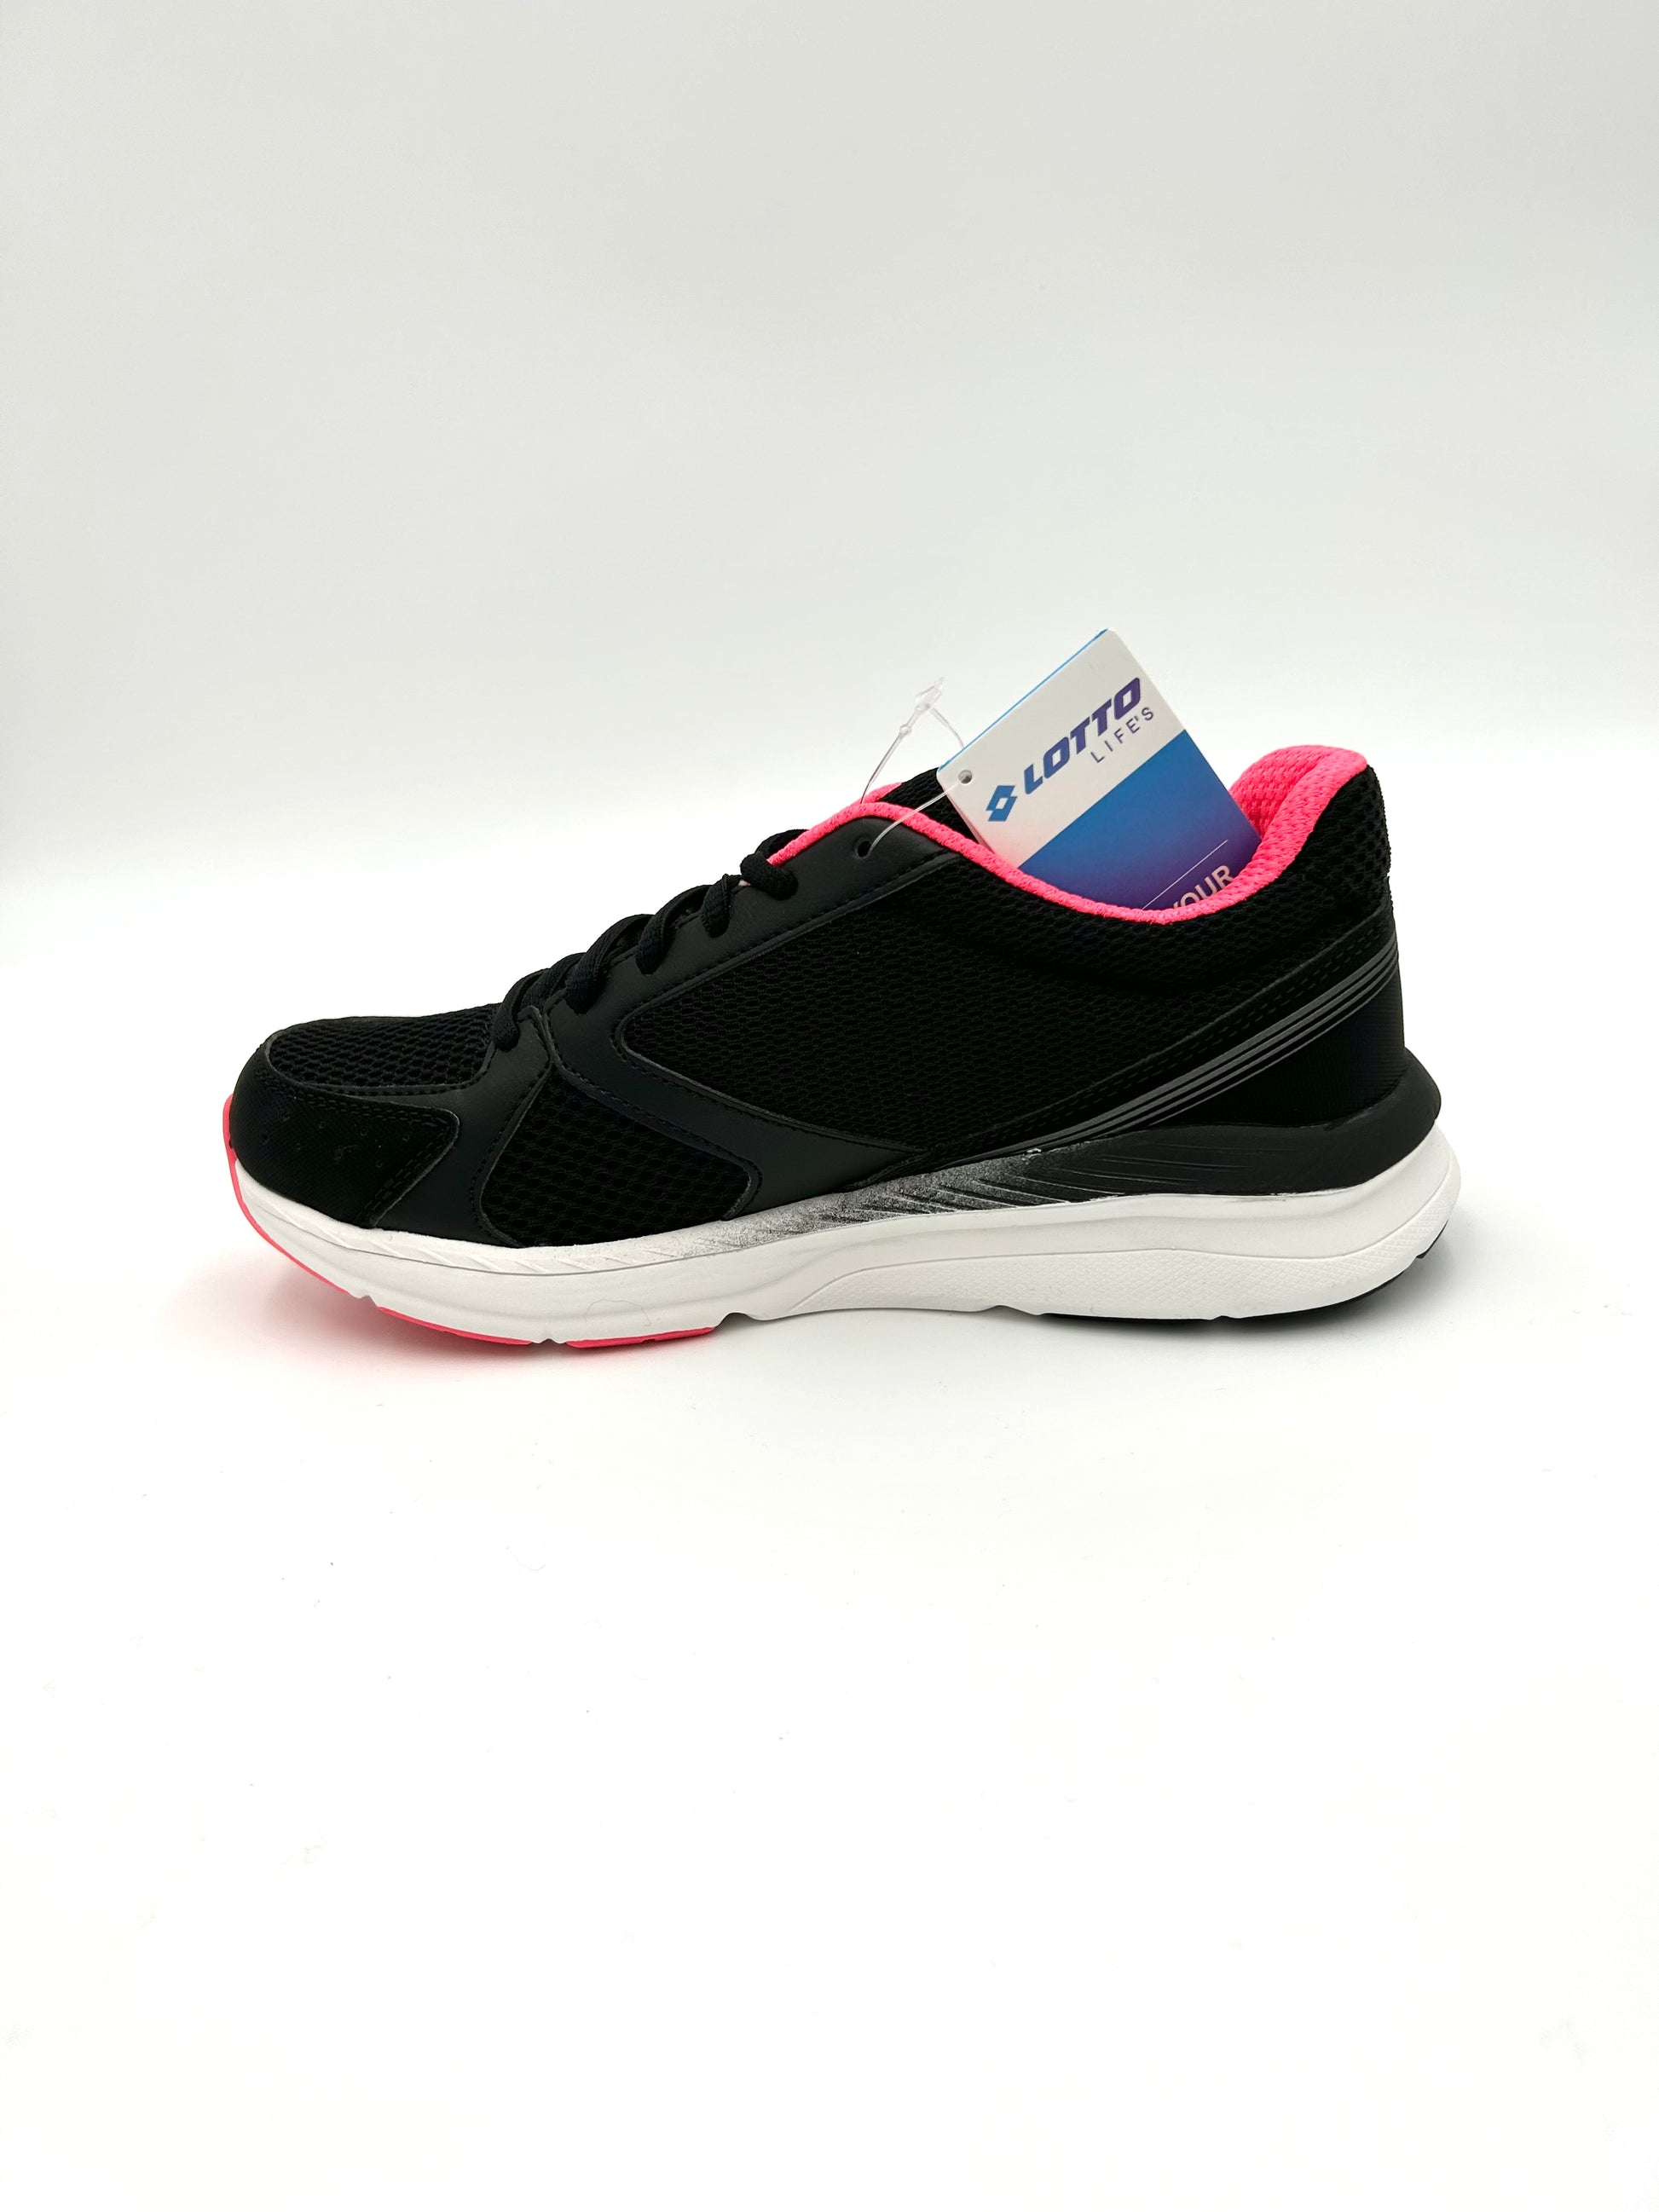 Lotto Sneakers Speedride 600 - black and pink - Lotto